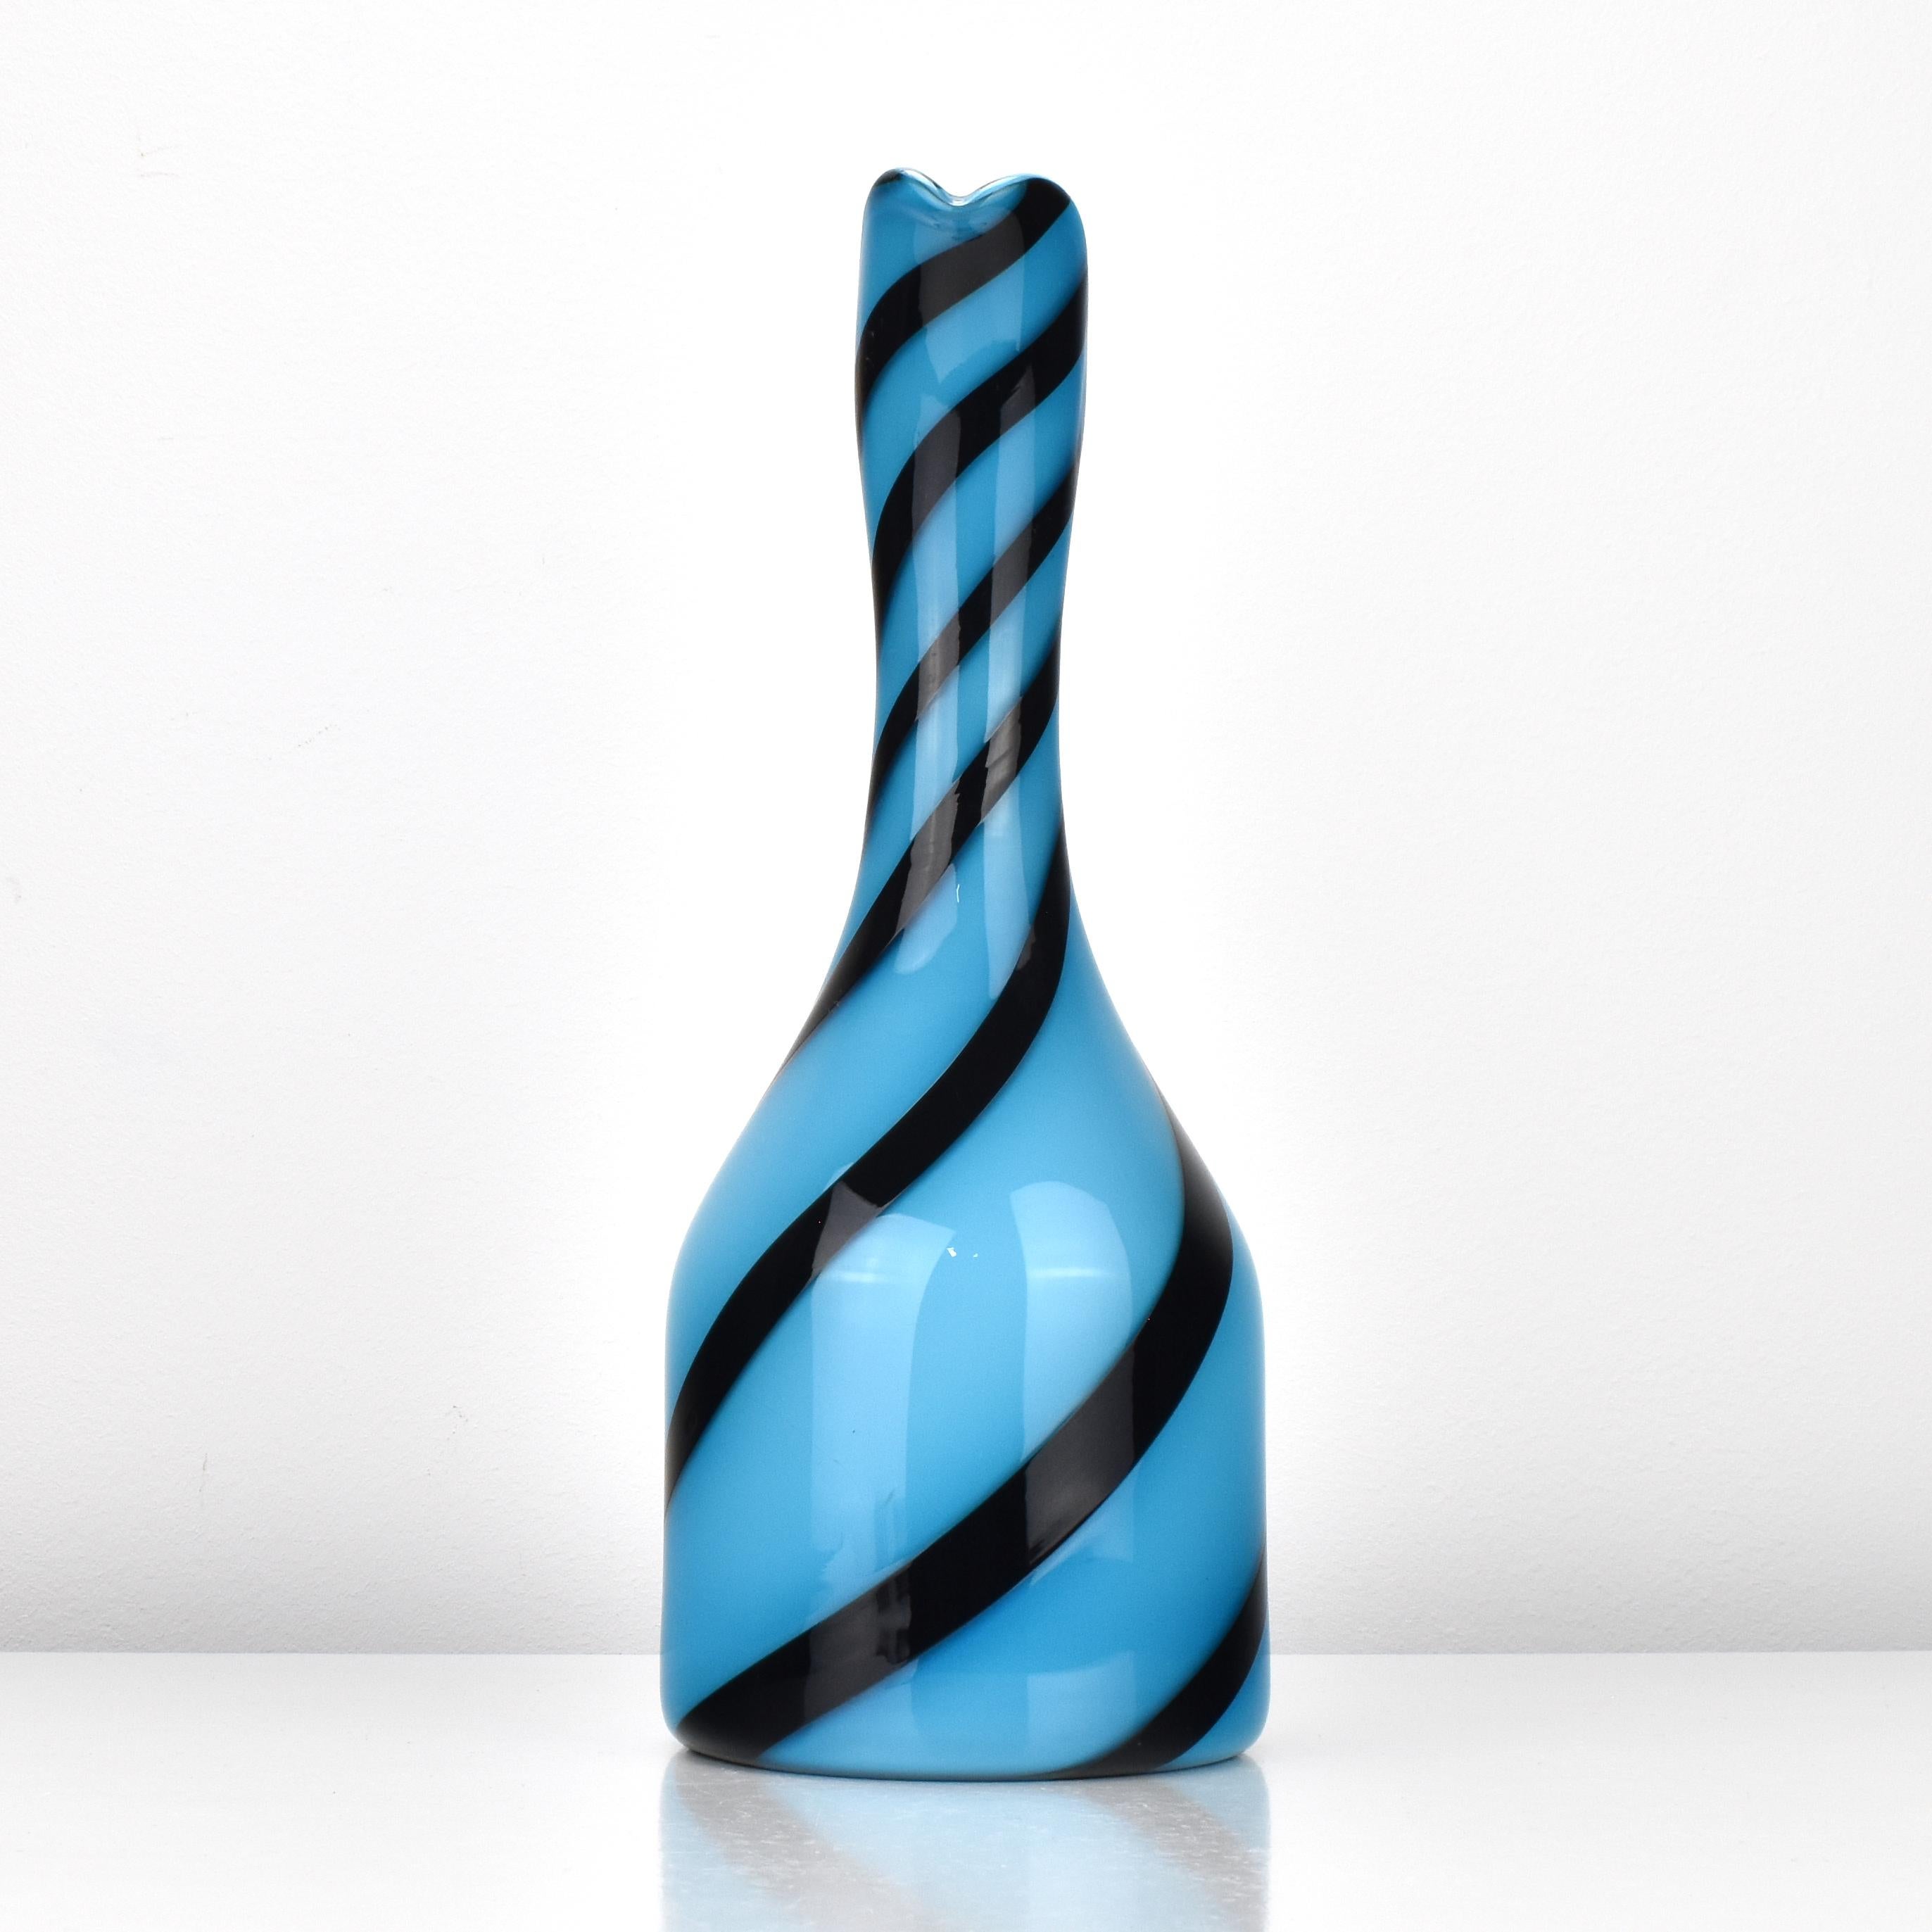 Hand-Crafted Art Glass Vase / Jug Empoli Opaline di Firenze Blue with Black Stripes Swirl For Sale